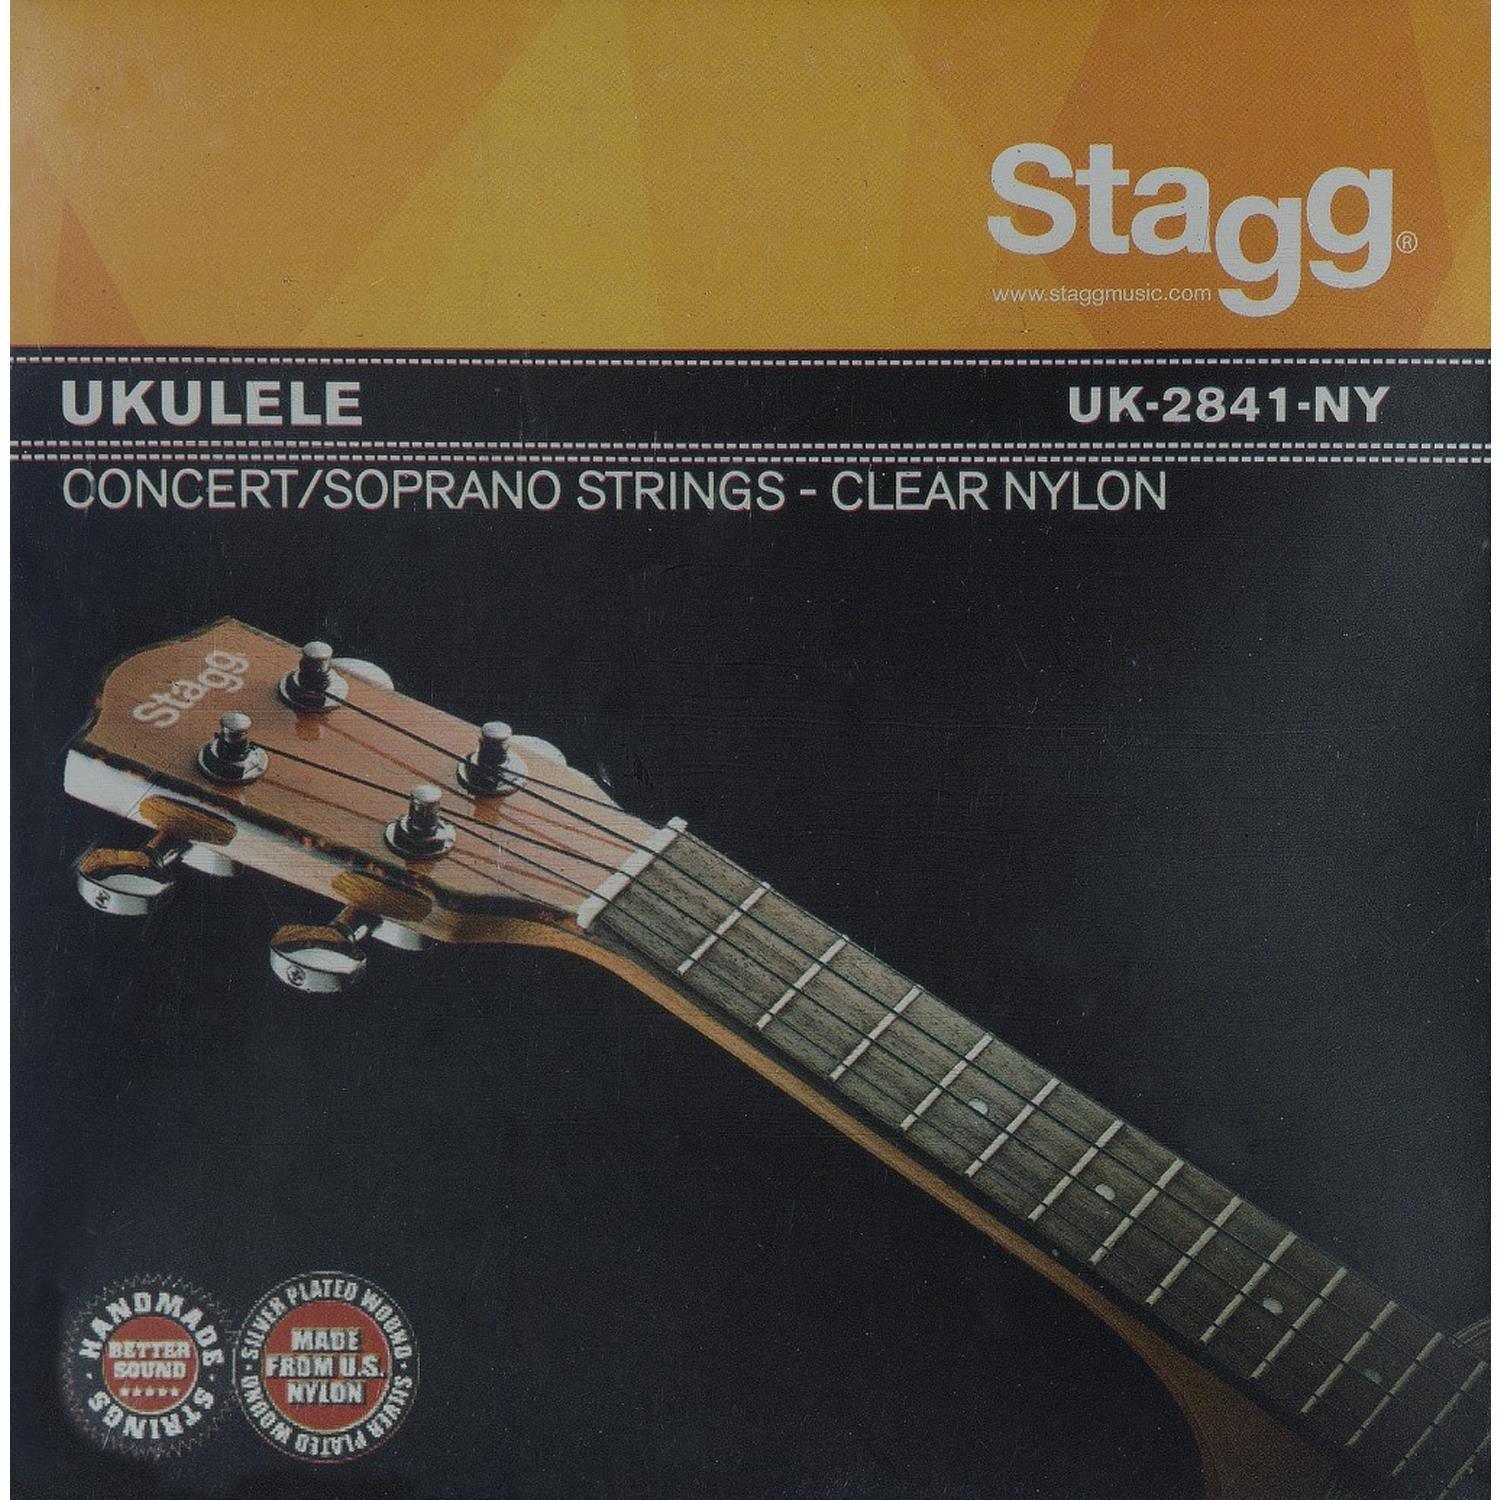 Stagg UK-2841-NY Ukulele Clear Nylon Strings For Soprano And Concert Models - DY Pro Audio